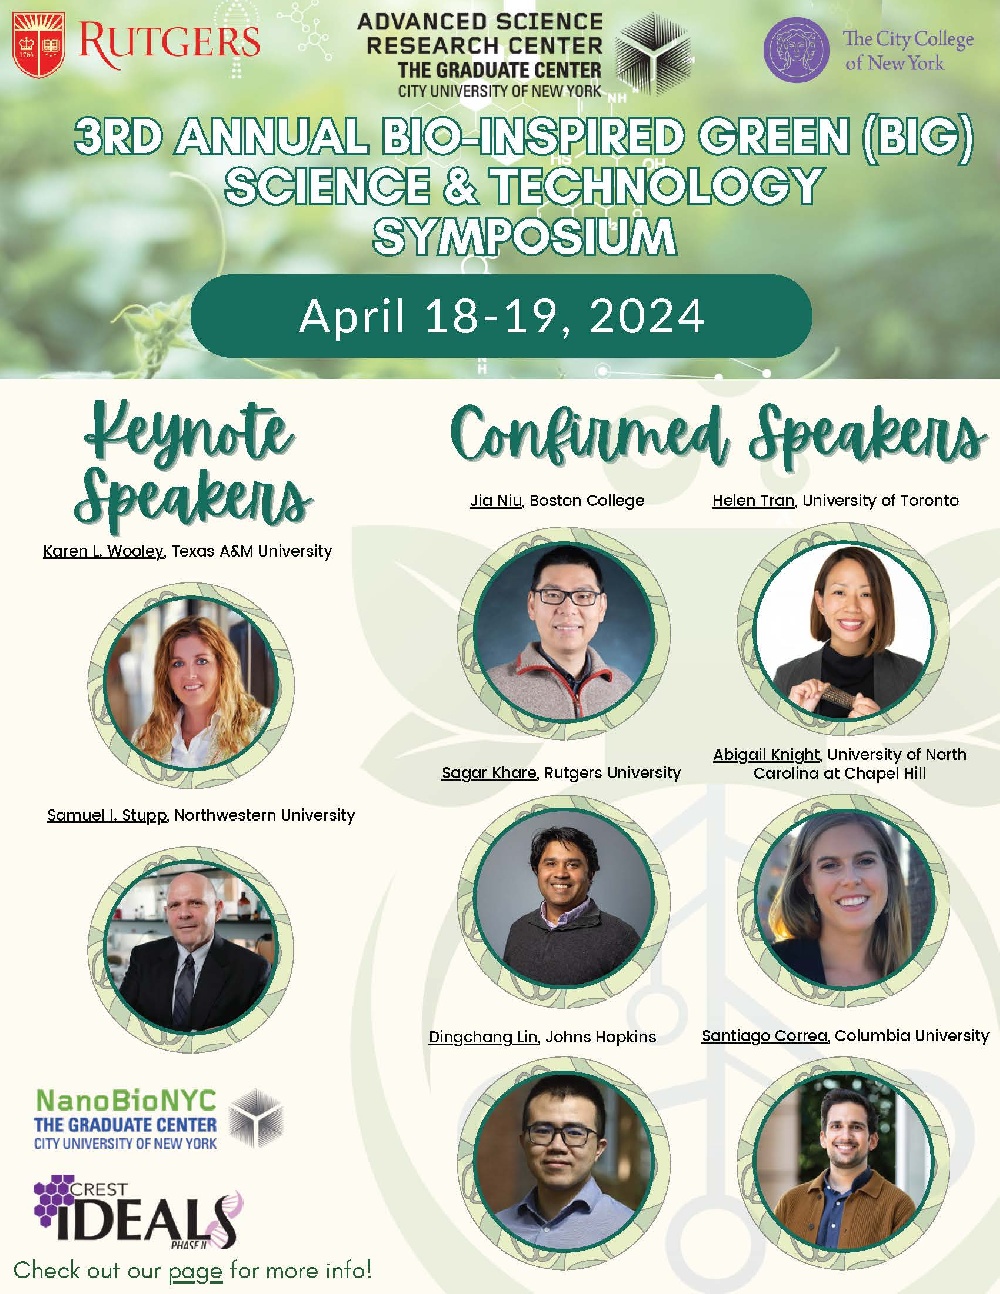 Bio-Inspired and Green (BIG) Science and Technology Symposium